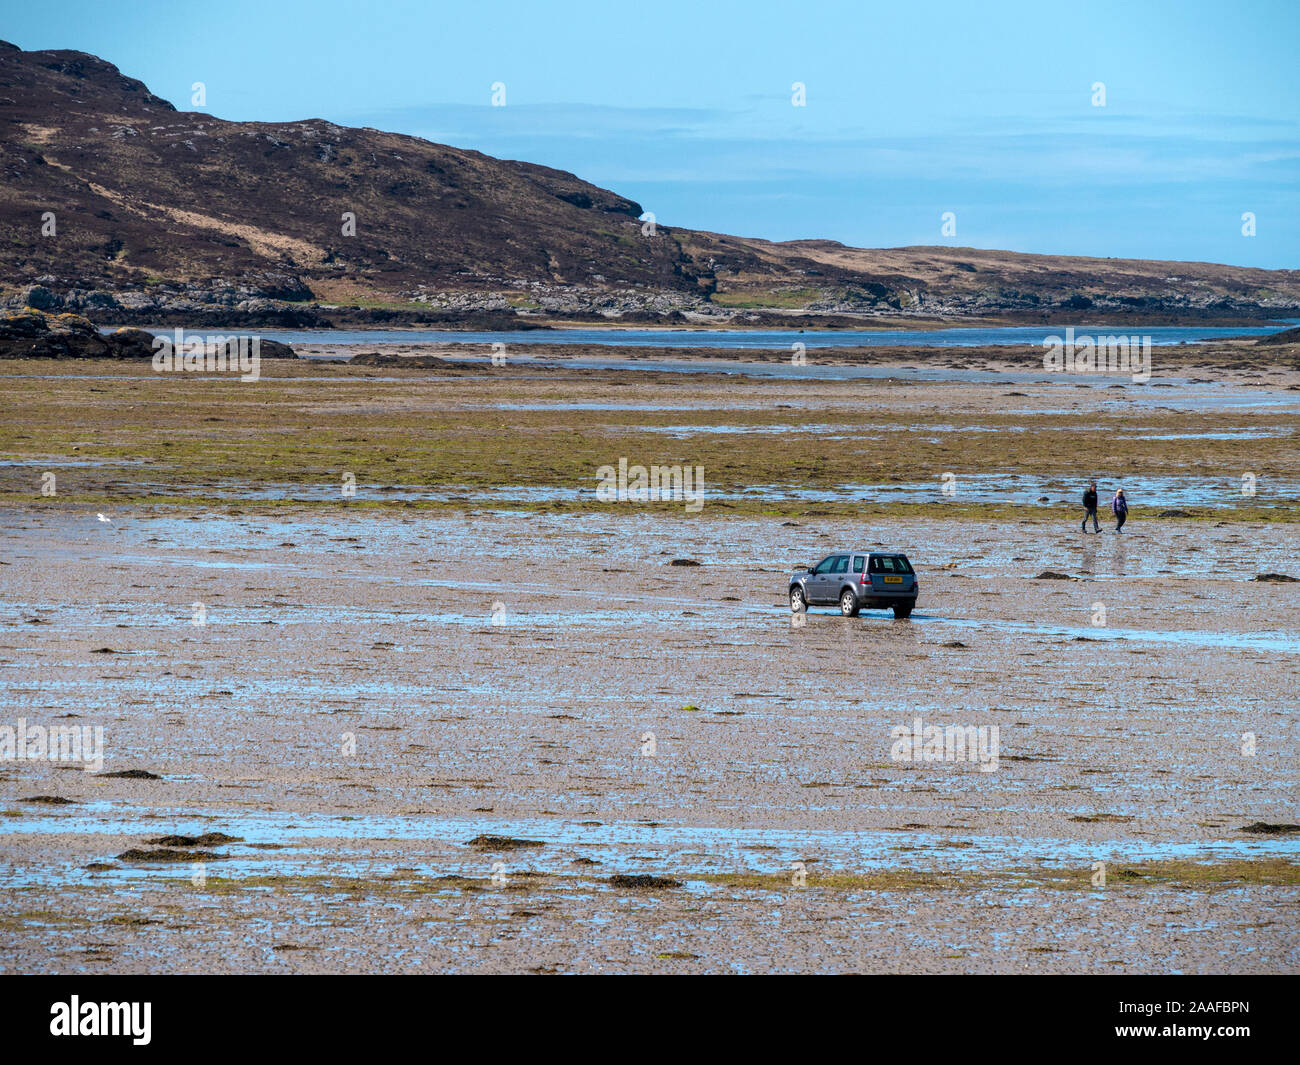 4x4 vehicle driving across The Strand at low tide from the Isle of Colonsay to the tidal island of Oronsay, Scotland, UK Stock Photo